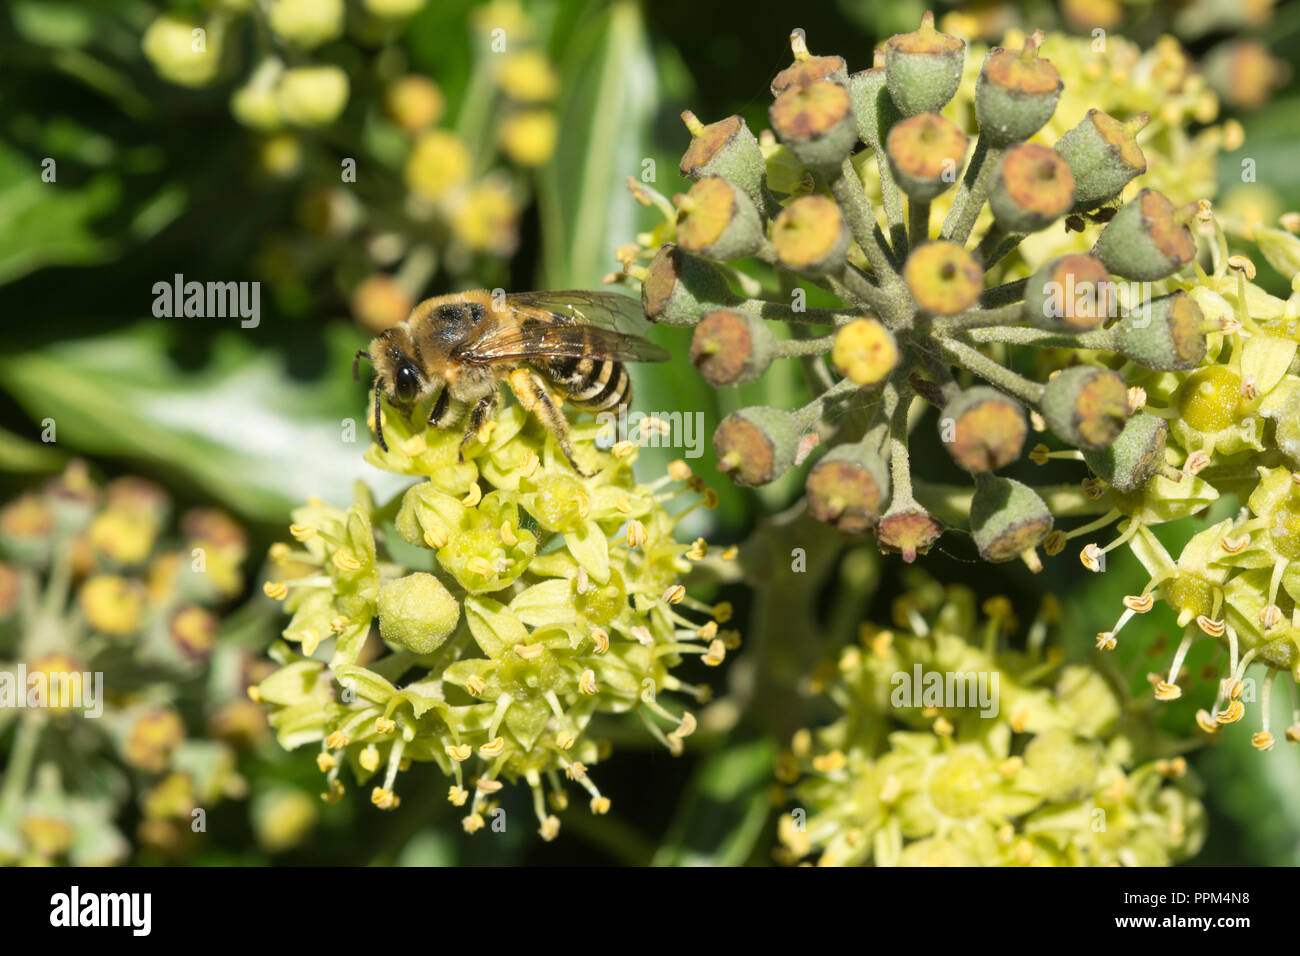 Ivy bee (Colletes hederae) feeding on nectar of ivy flowers (Hedera helix) in late September and collecting pollen Stock Photo